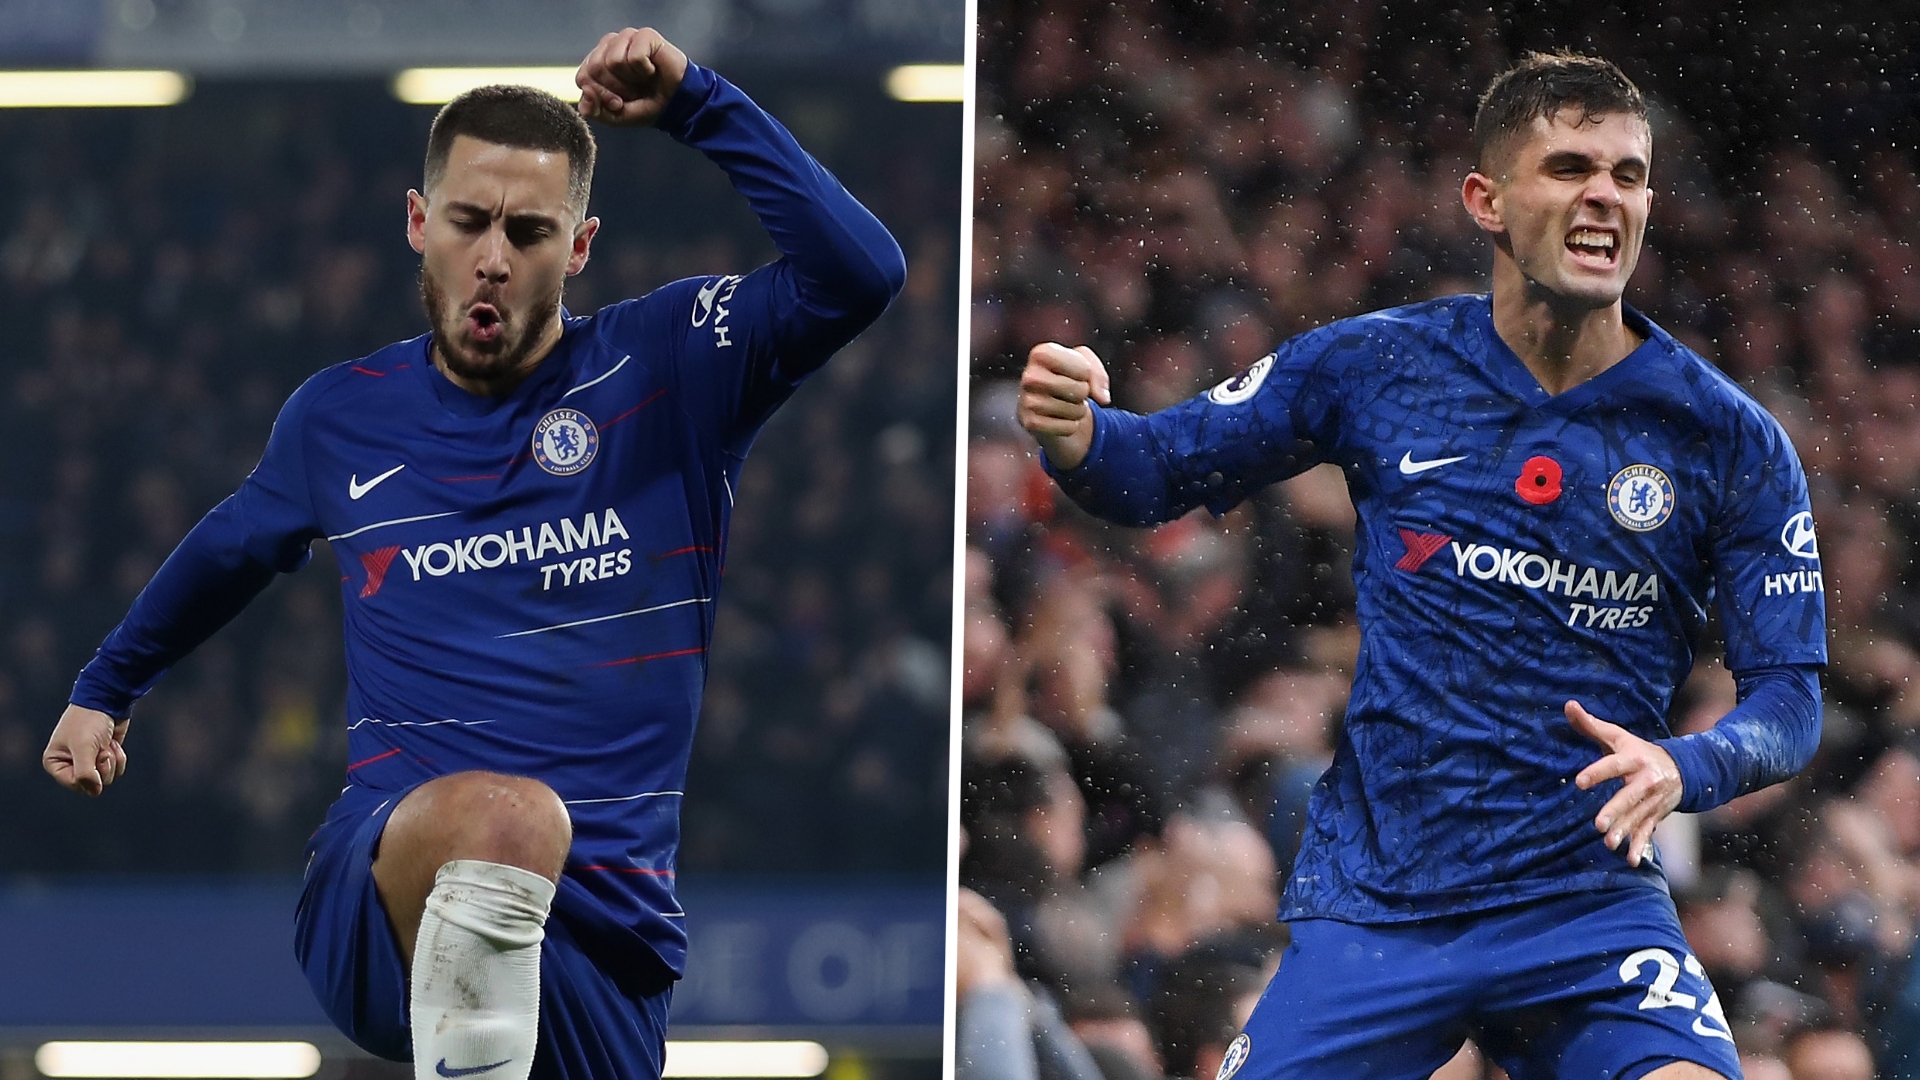 'Pulisic can’t be compared to Hazard - he carried Chelsea!' - USMNT forward still learning, says Burley